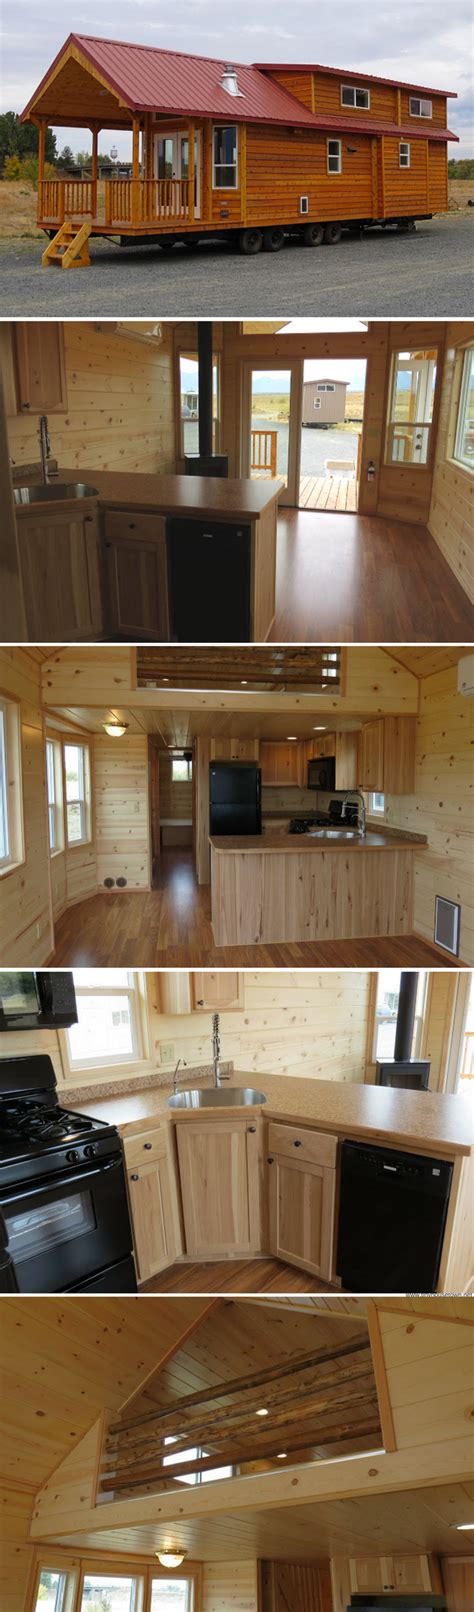 Classic Double Loft A Two Bedroom Park Model Cabin Tiny House Living